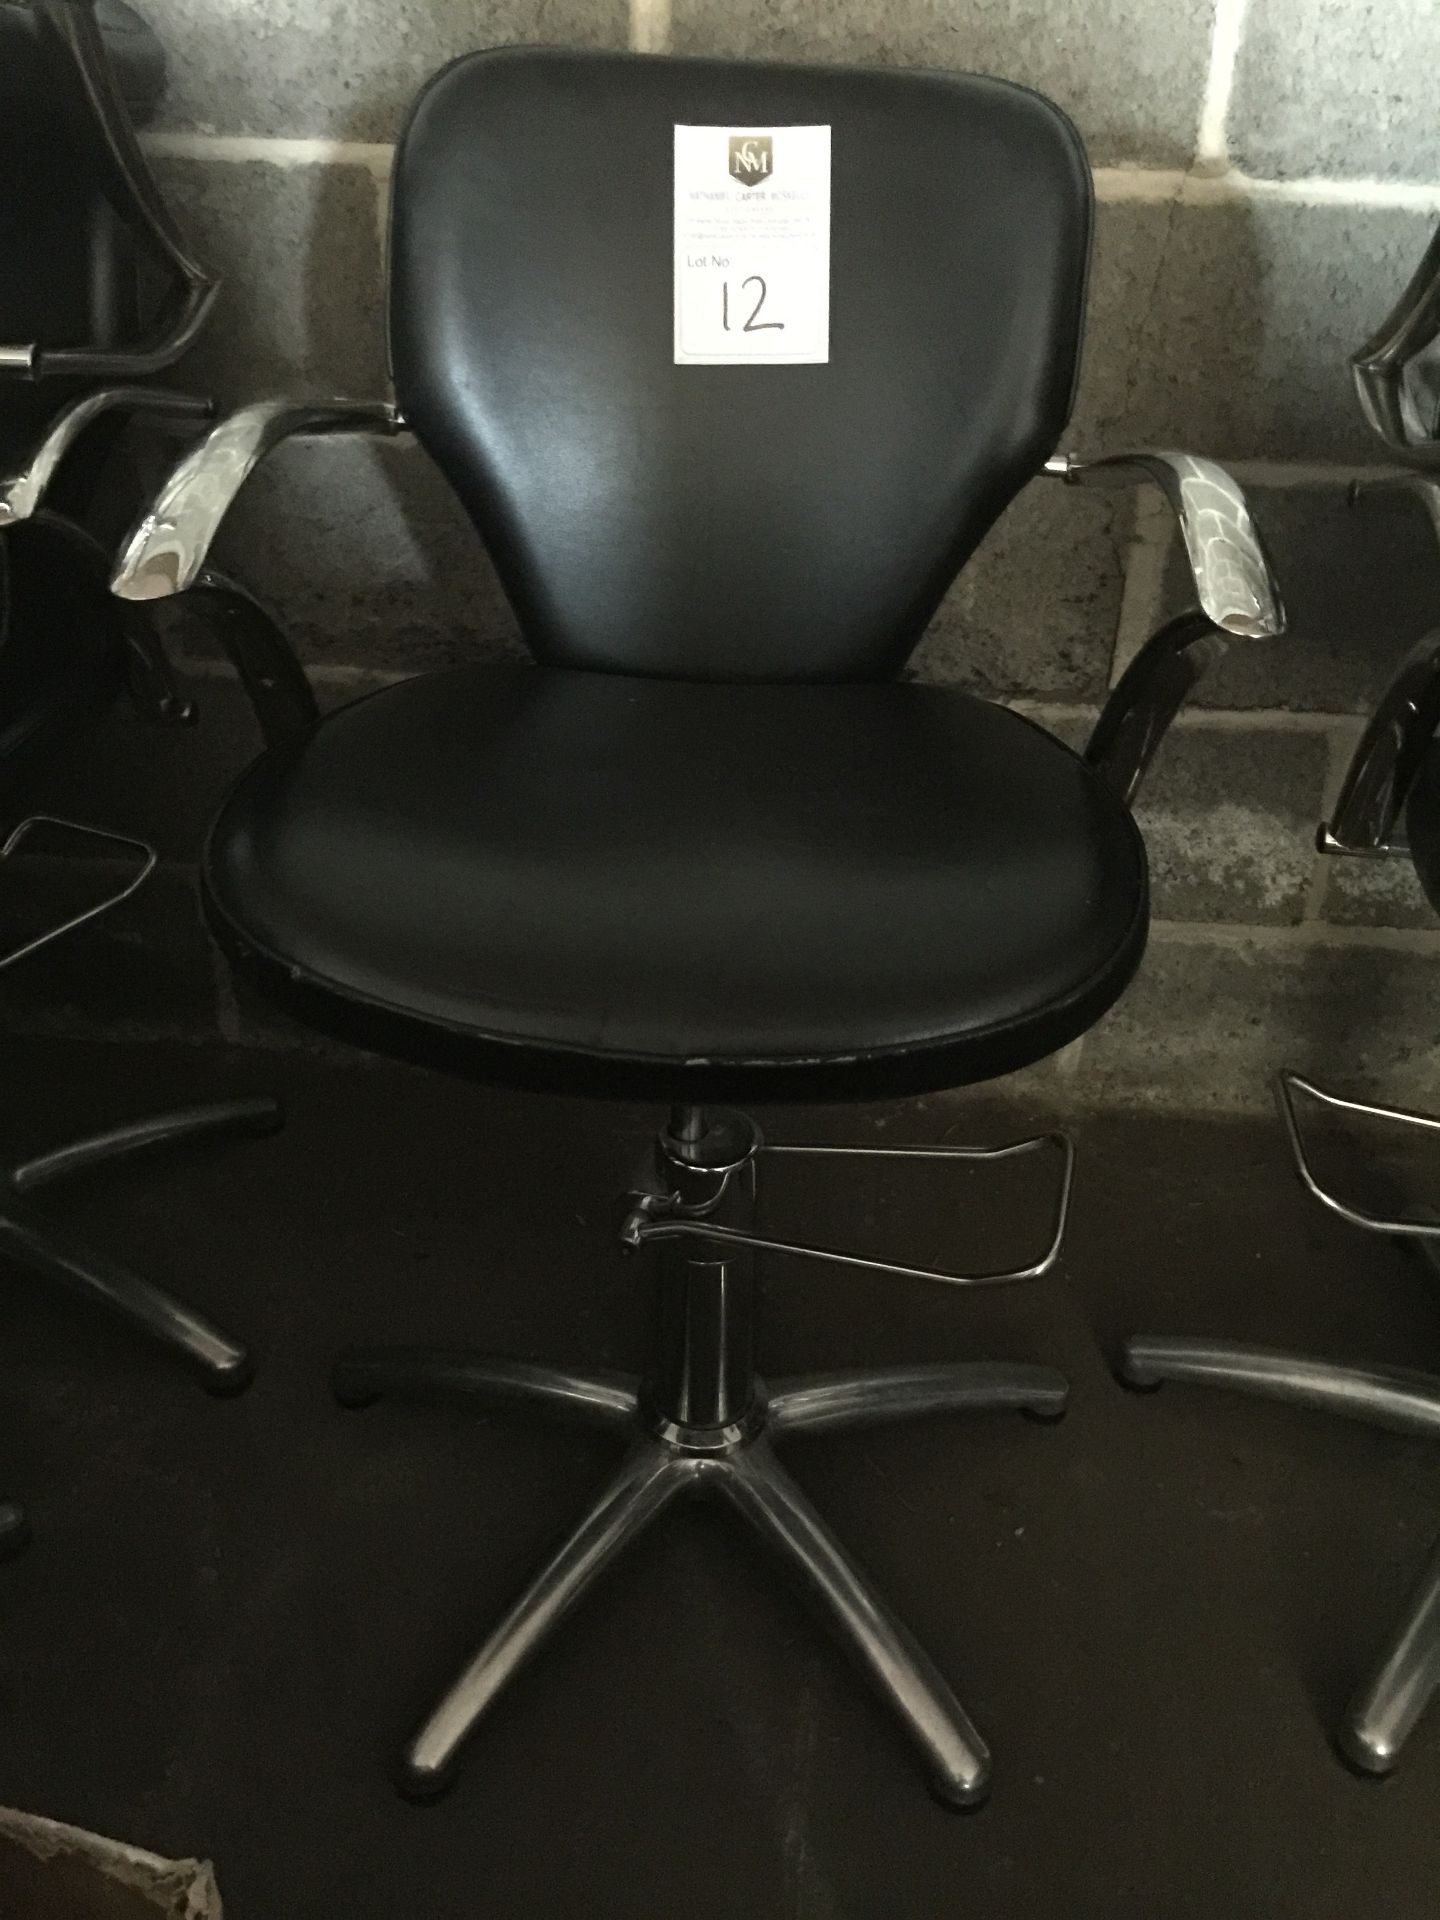 Salon Chair - Adustable height.  Black and Chrome.  Good condition, but in need of a clean.  One arm